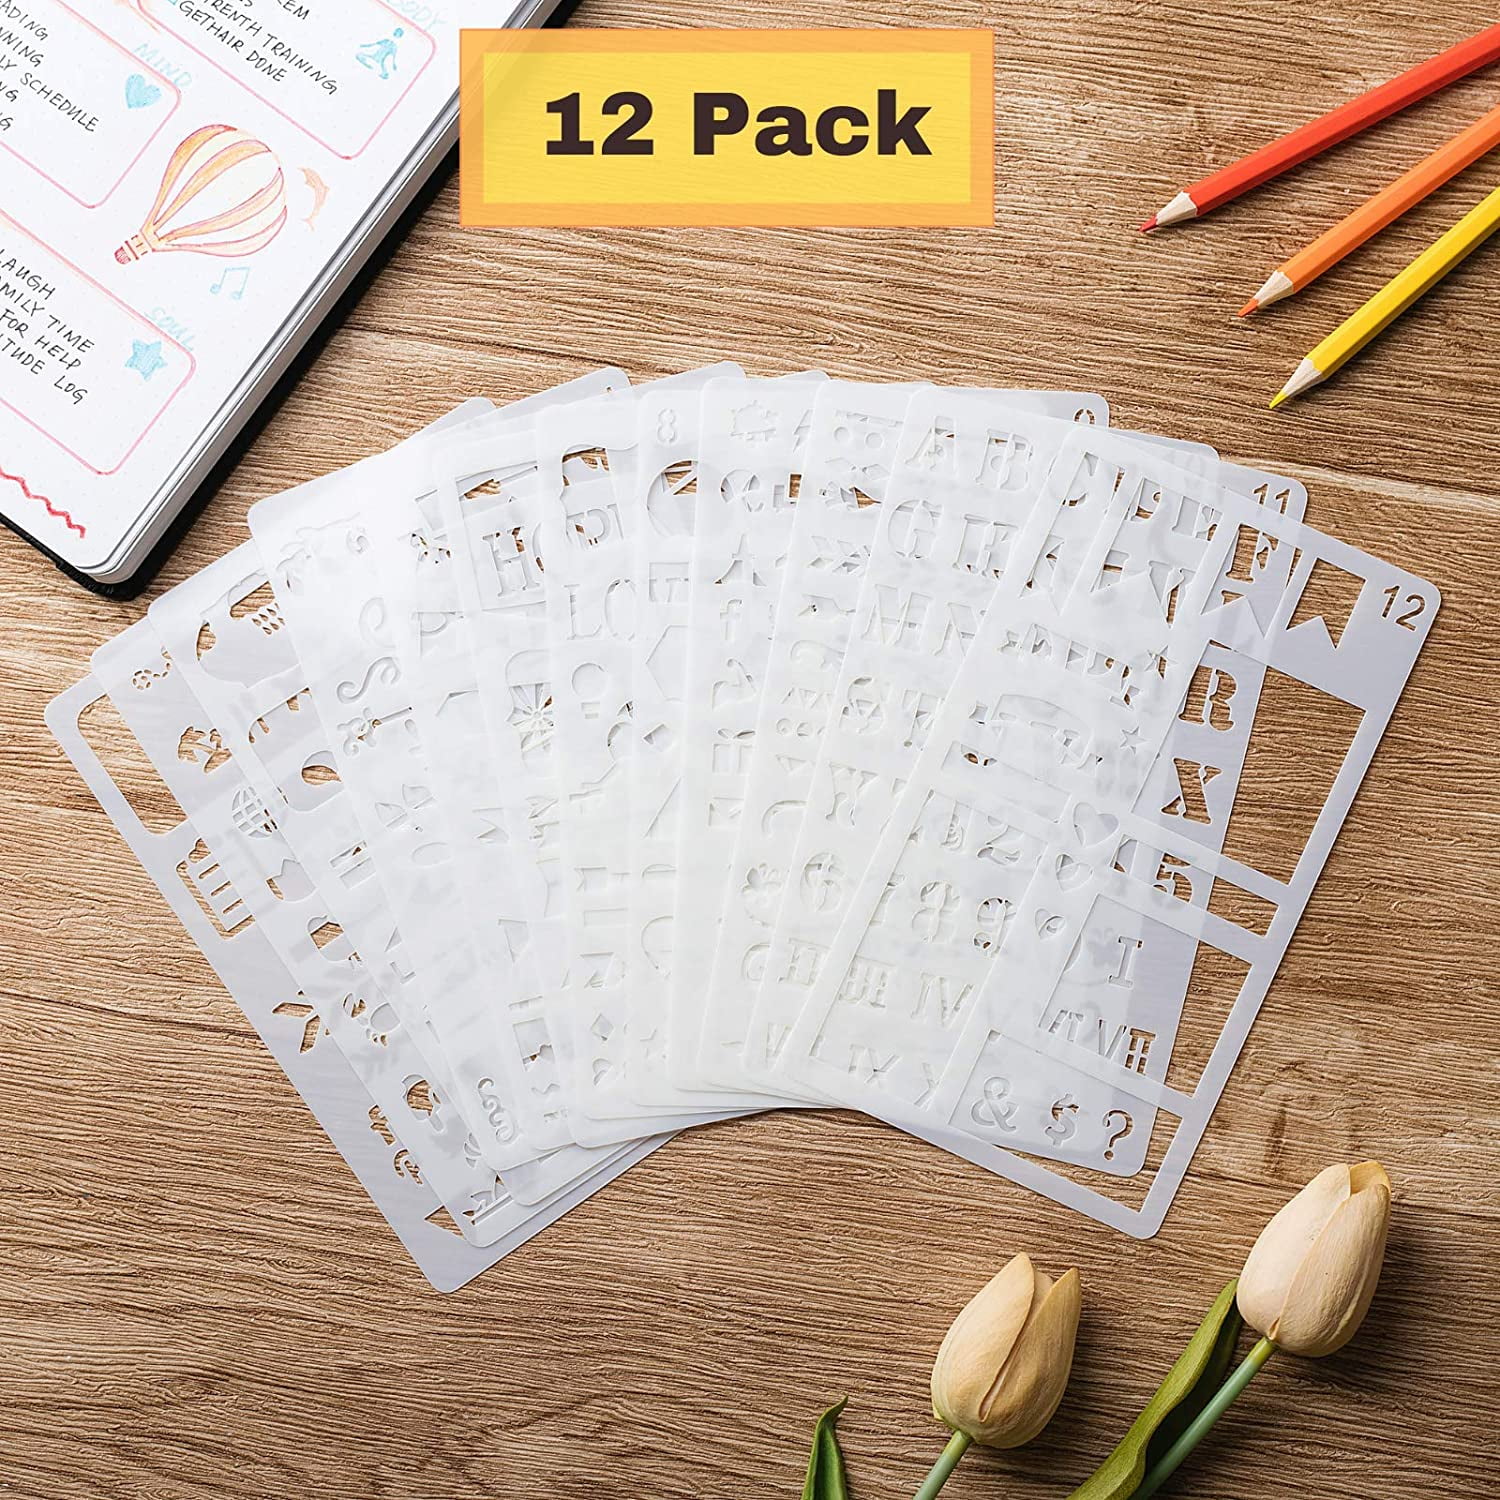 MWOOT 30 Pieces Mixed Bullet Journal Stencil Kit, Letter Drawing Painting  Alphabet Stencils, Reusable Bullet Journal Accessory for DIY Planner